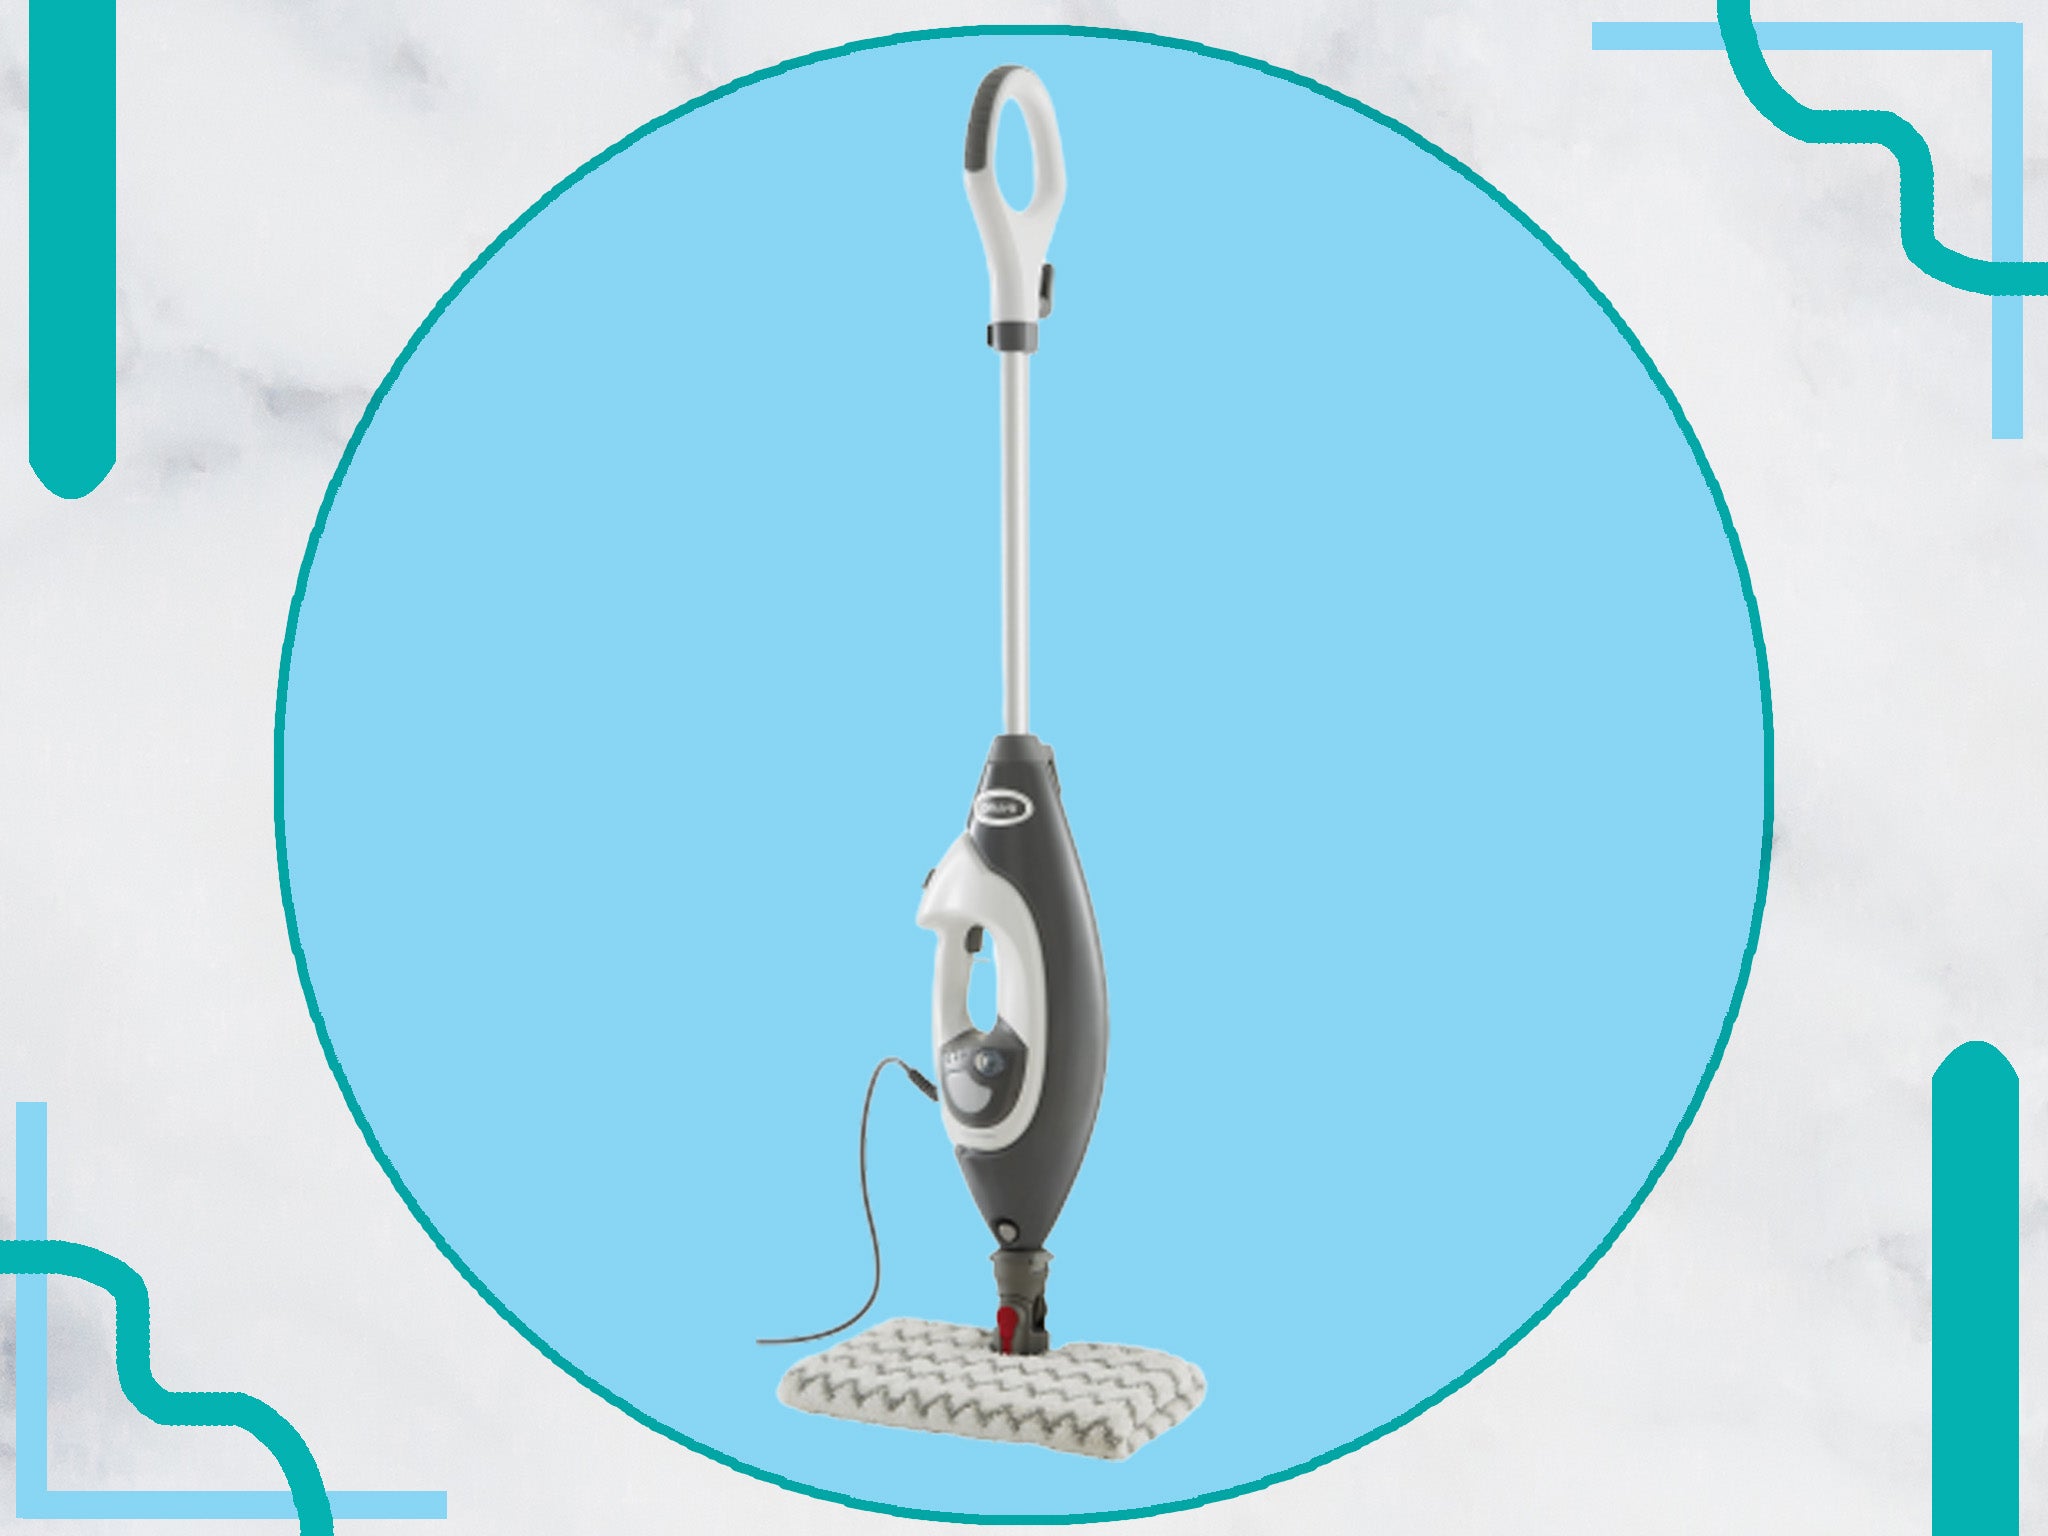 More powerful than your standard mop, this steam cleaner can tackle the toughest of stains